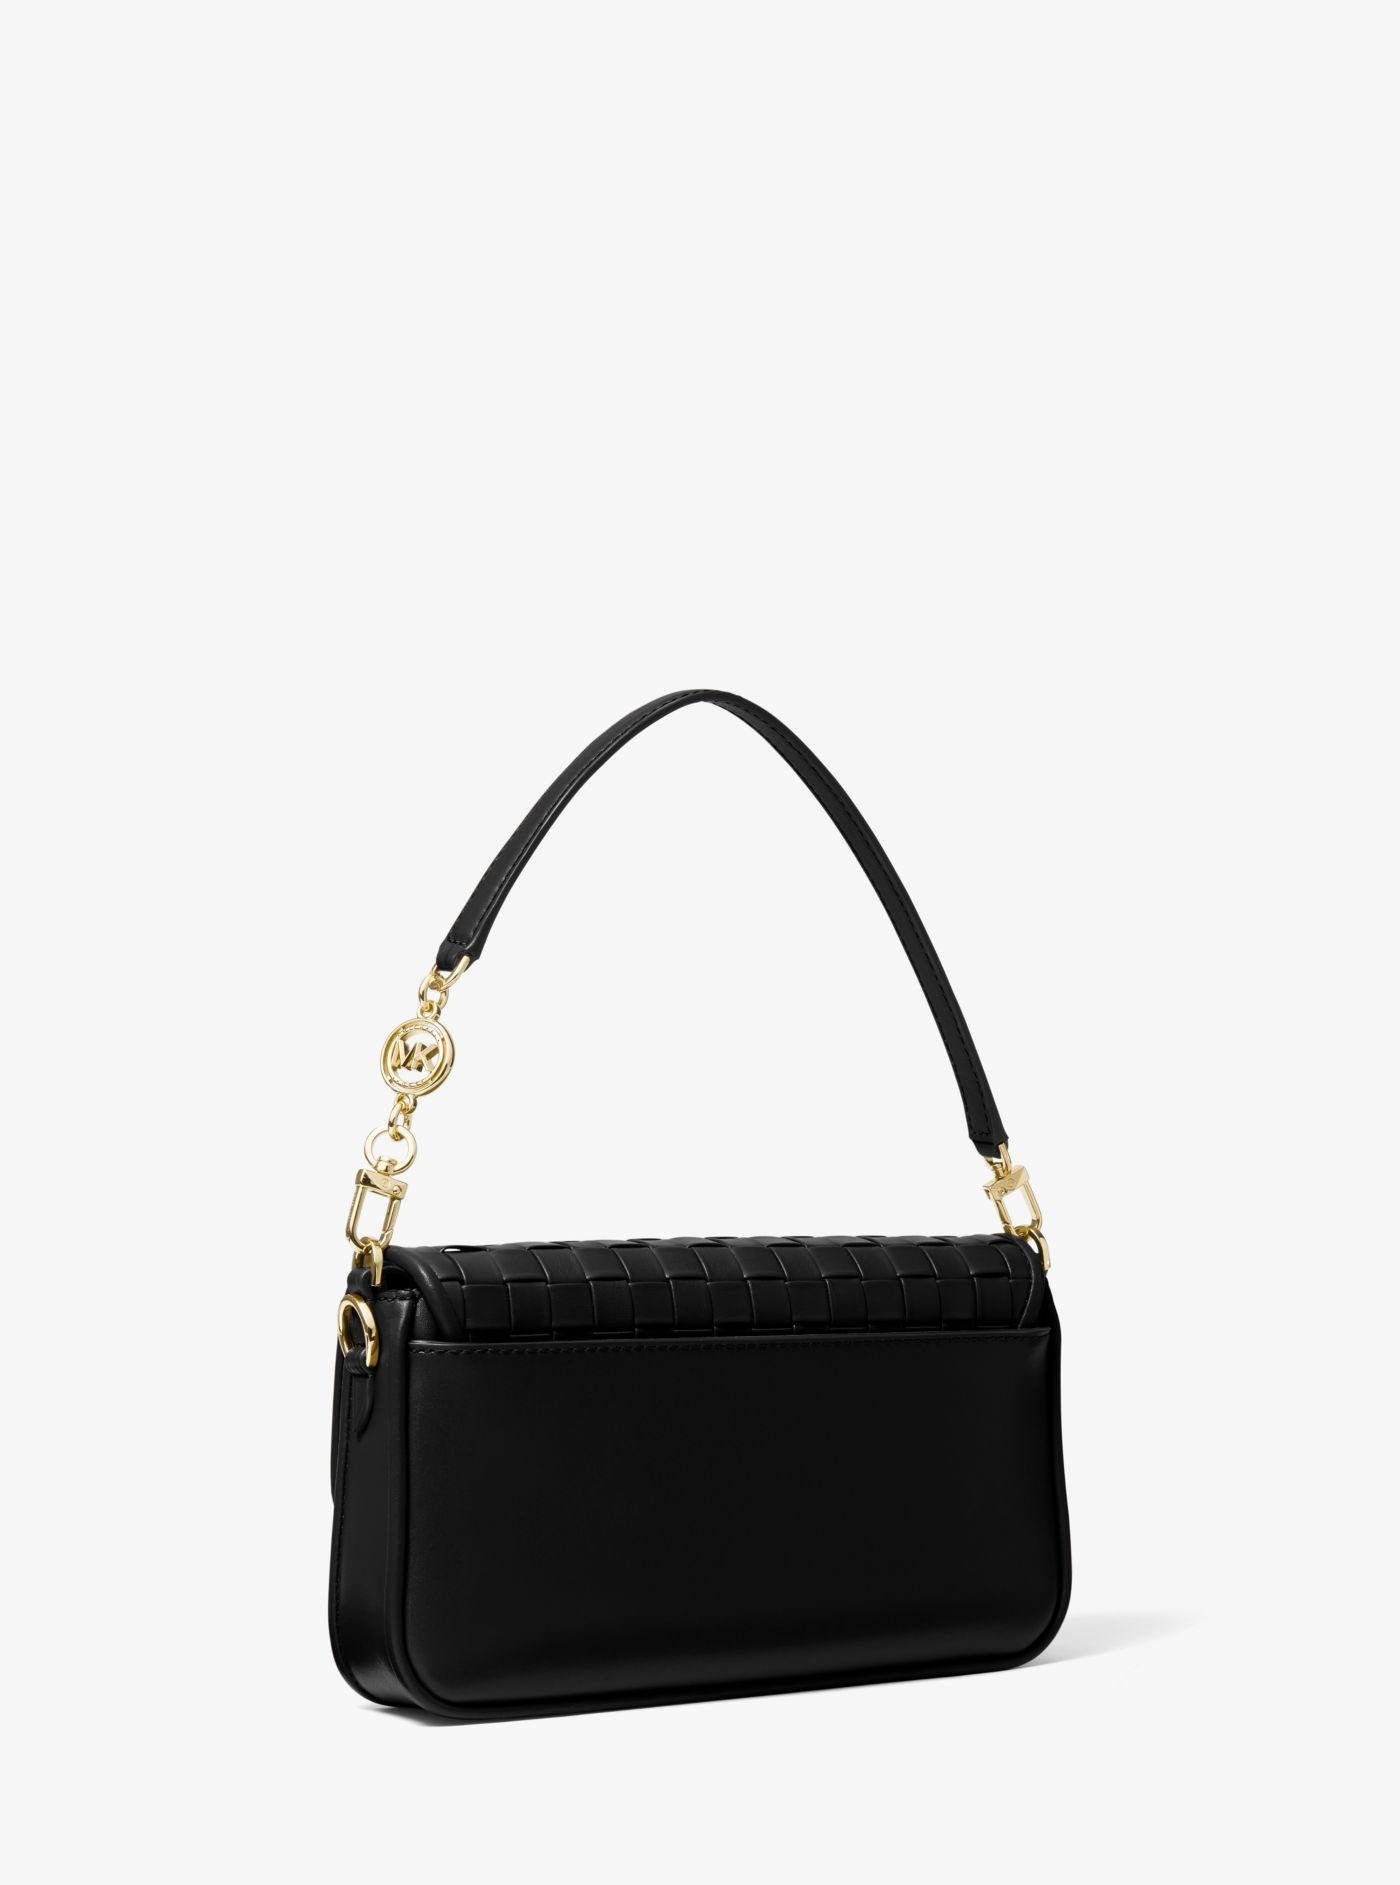 Michael Kors Bradshaw Small Woven Leather Shoulder Bag in Black | Lyst